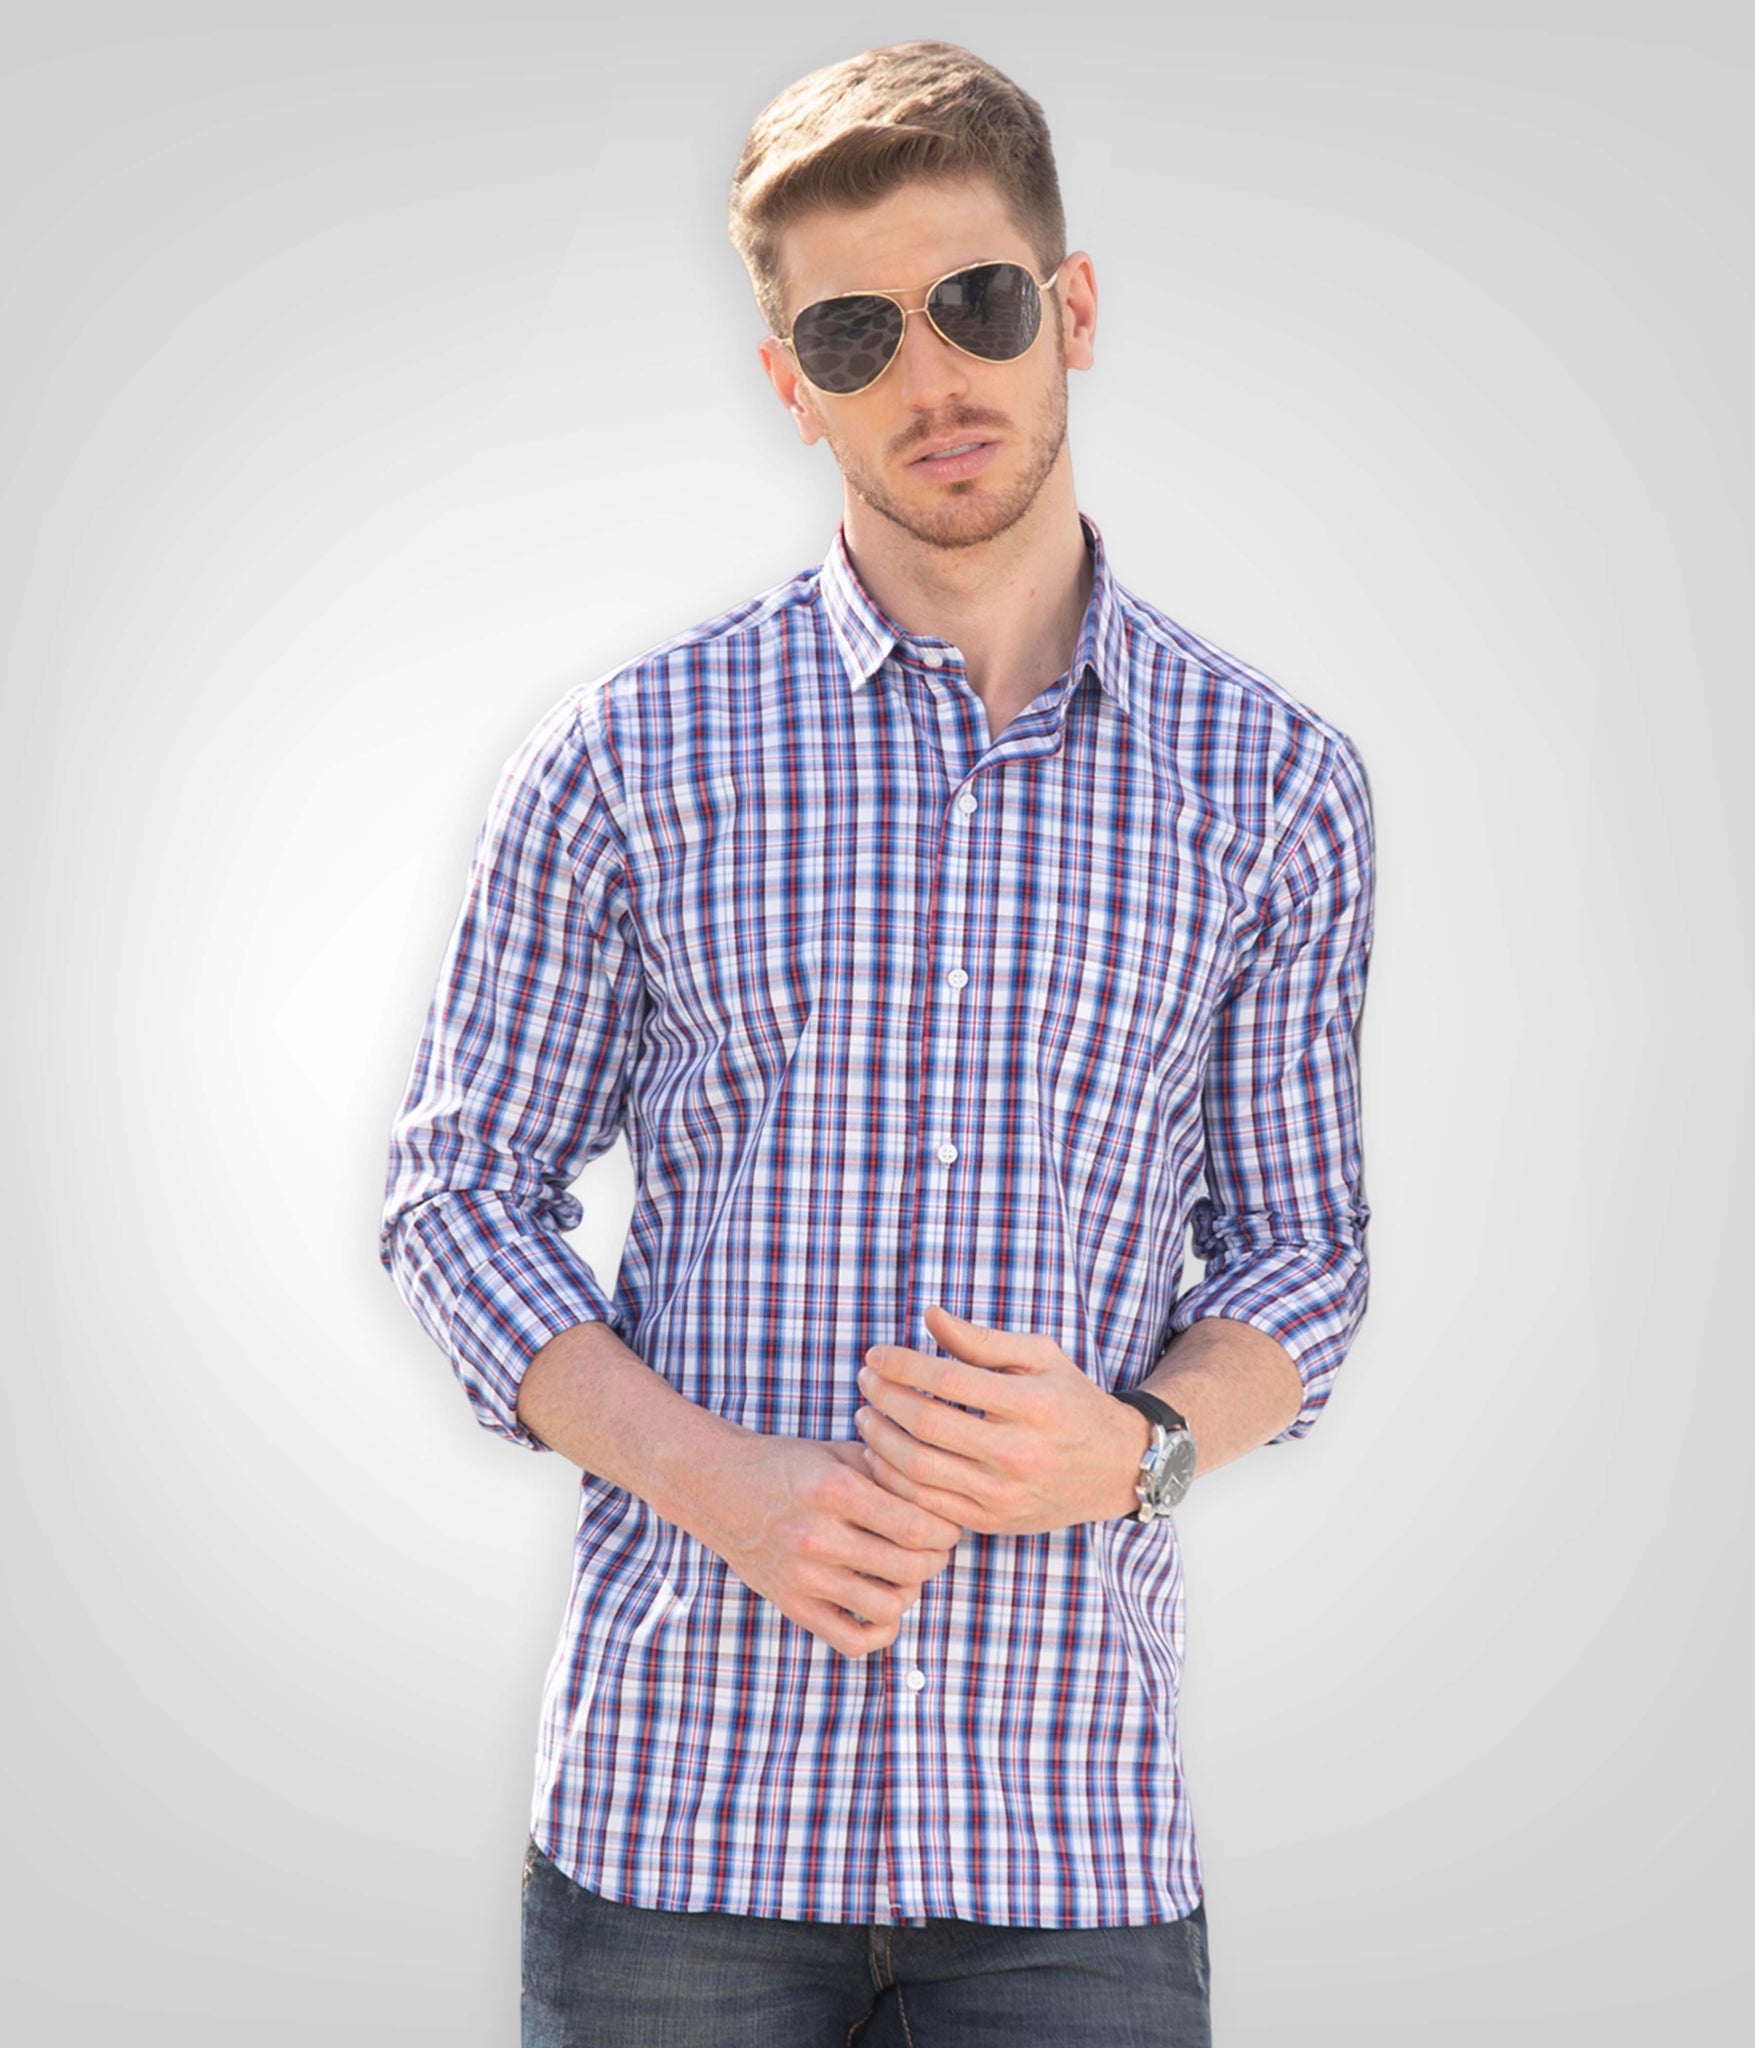 Chequered for a Contemporary Appeal shirt